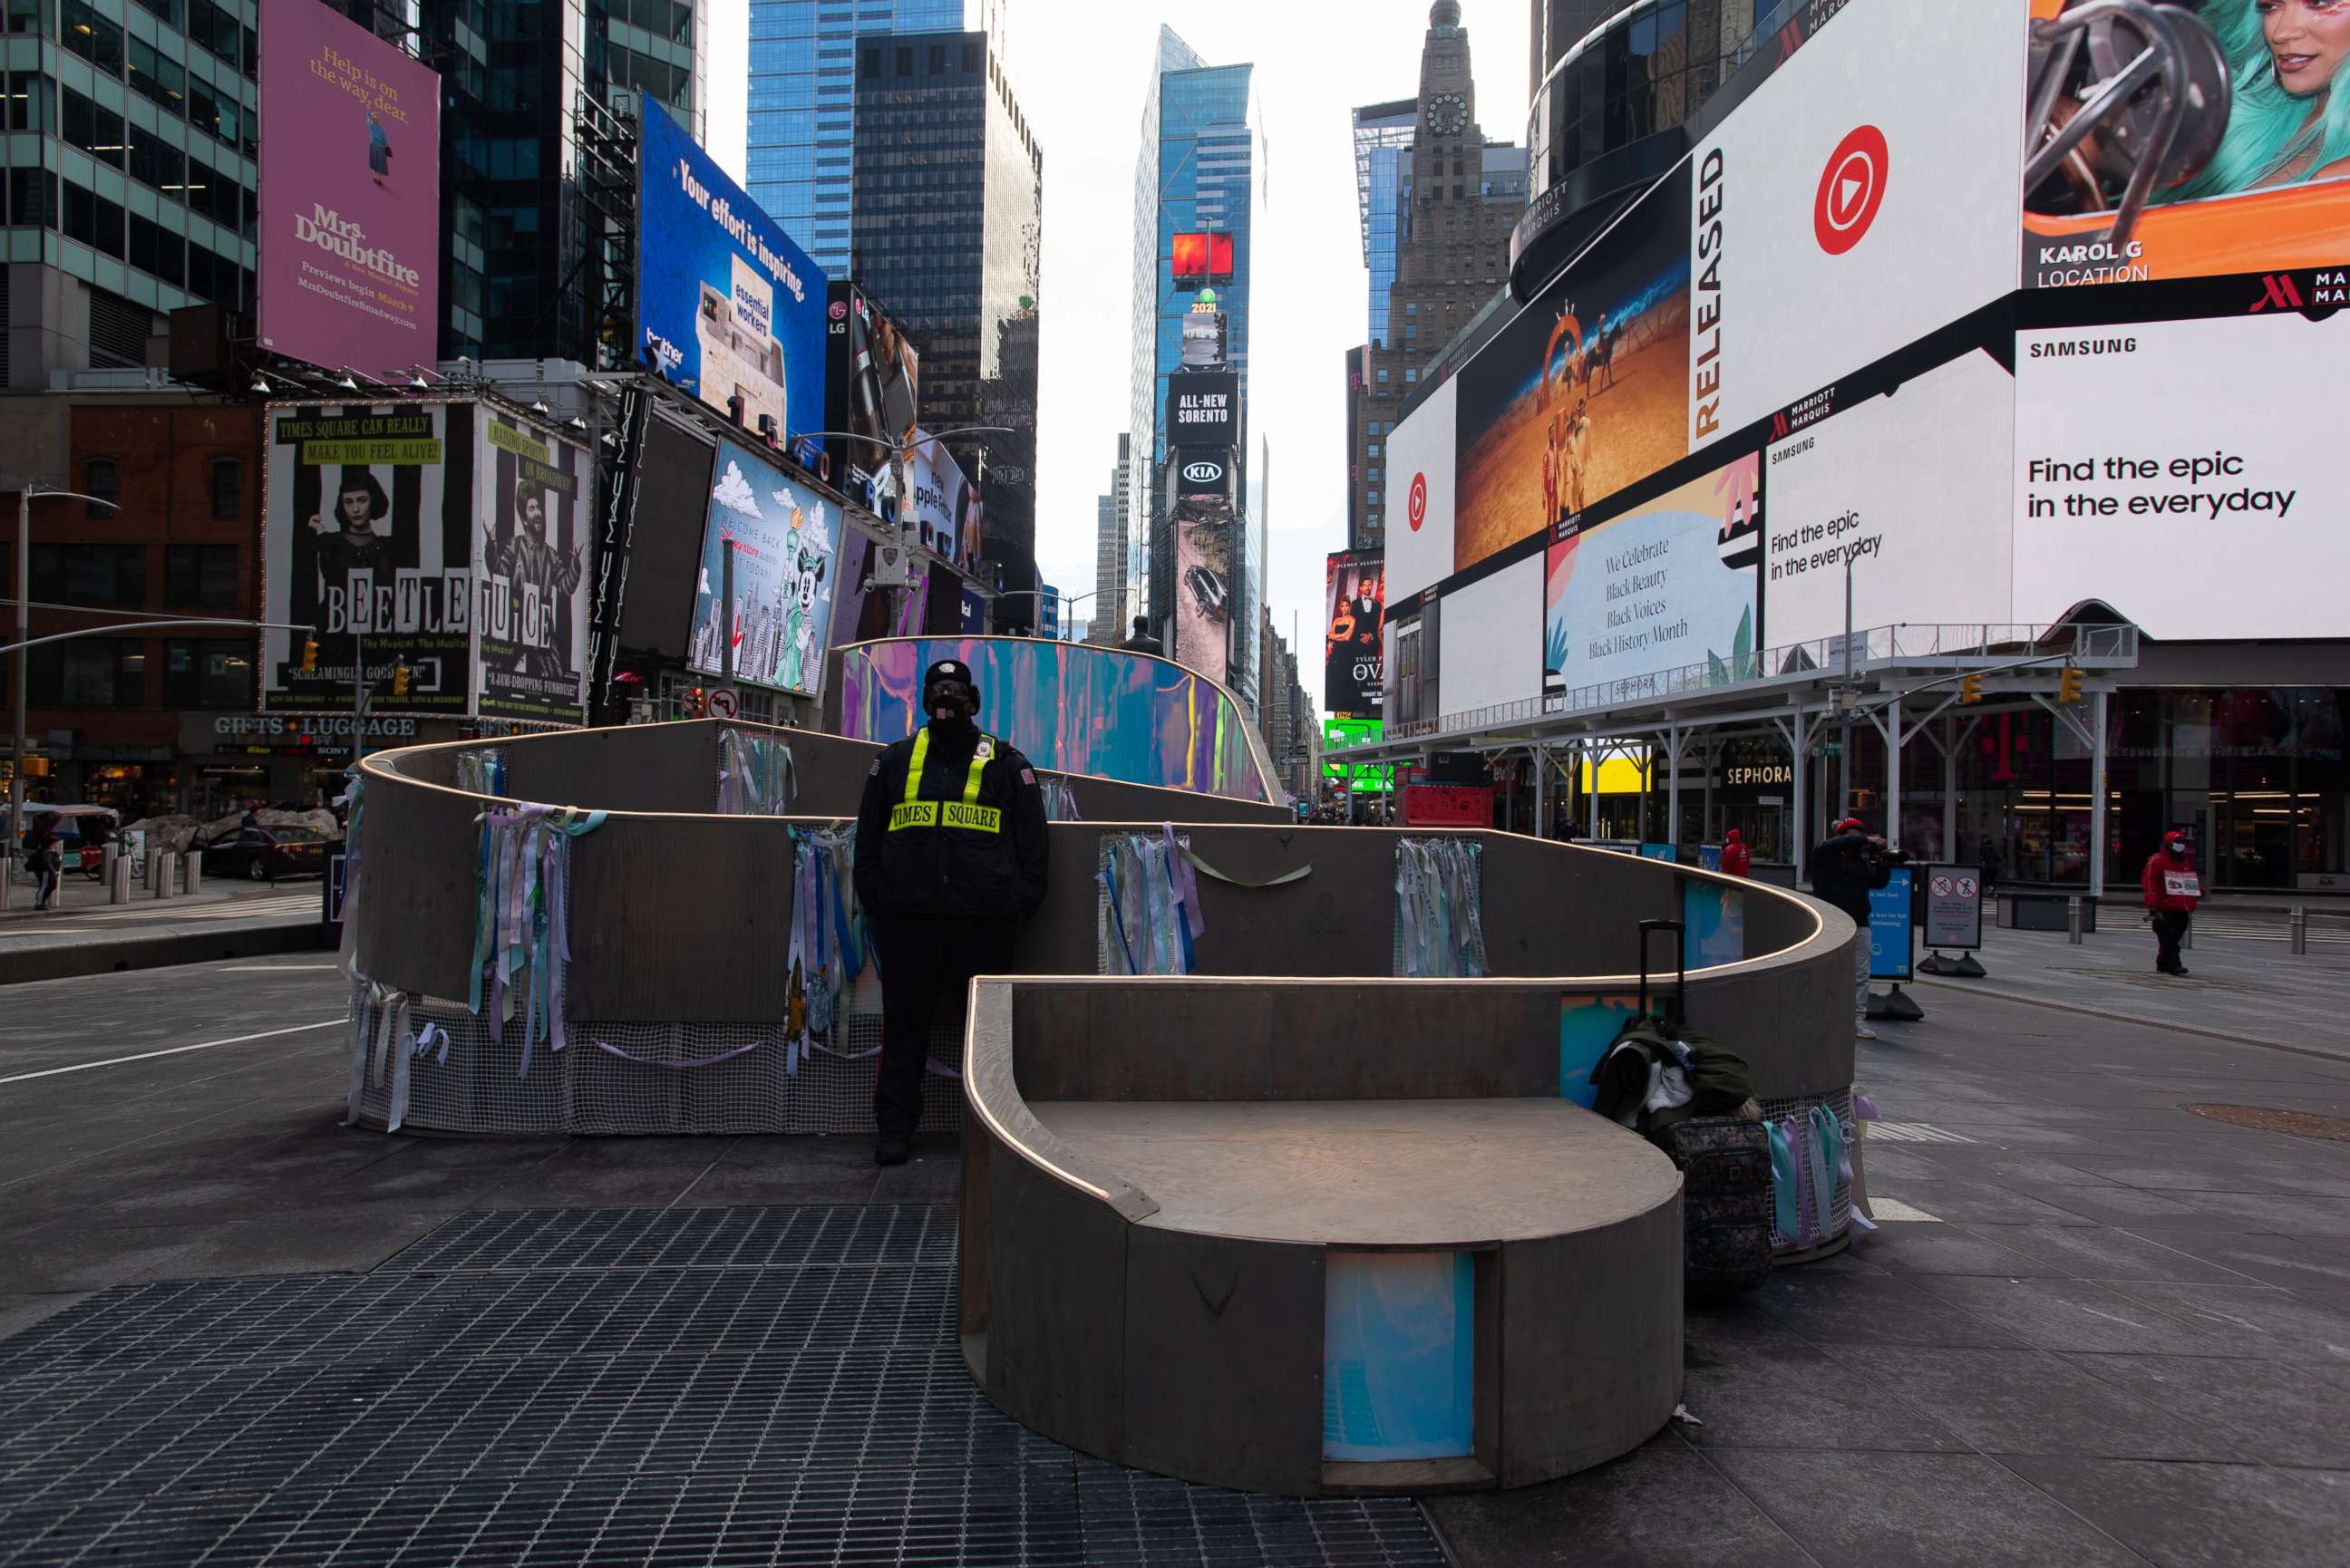 PHOTO: A security guard stands with an art installation in New York's Times Square, Feb. 16, 2021.